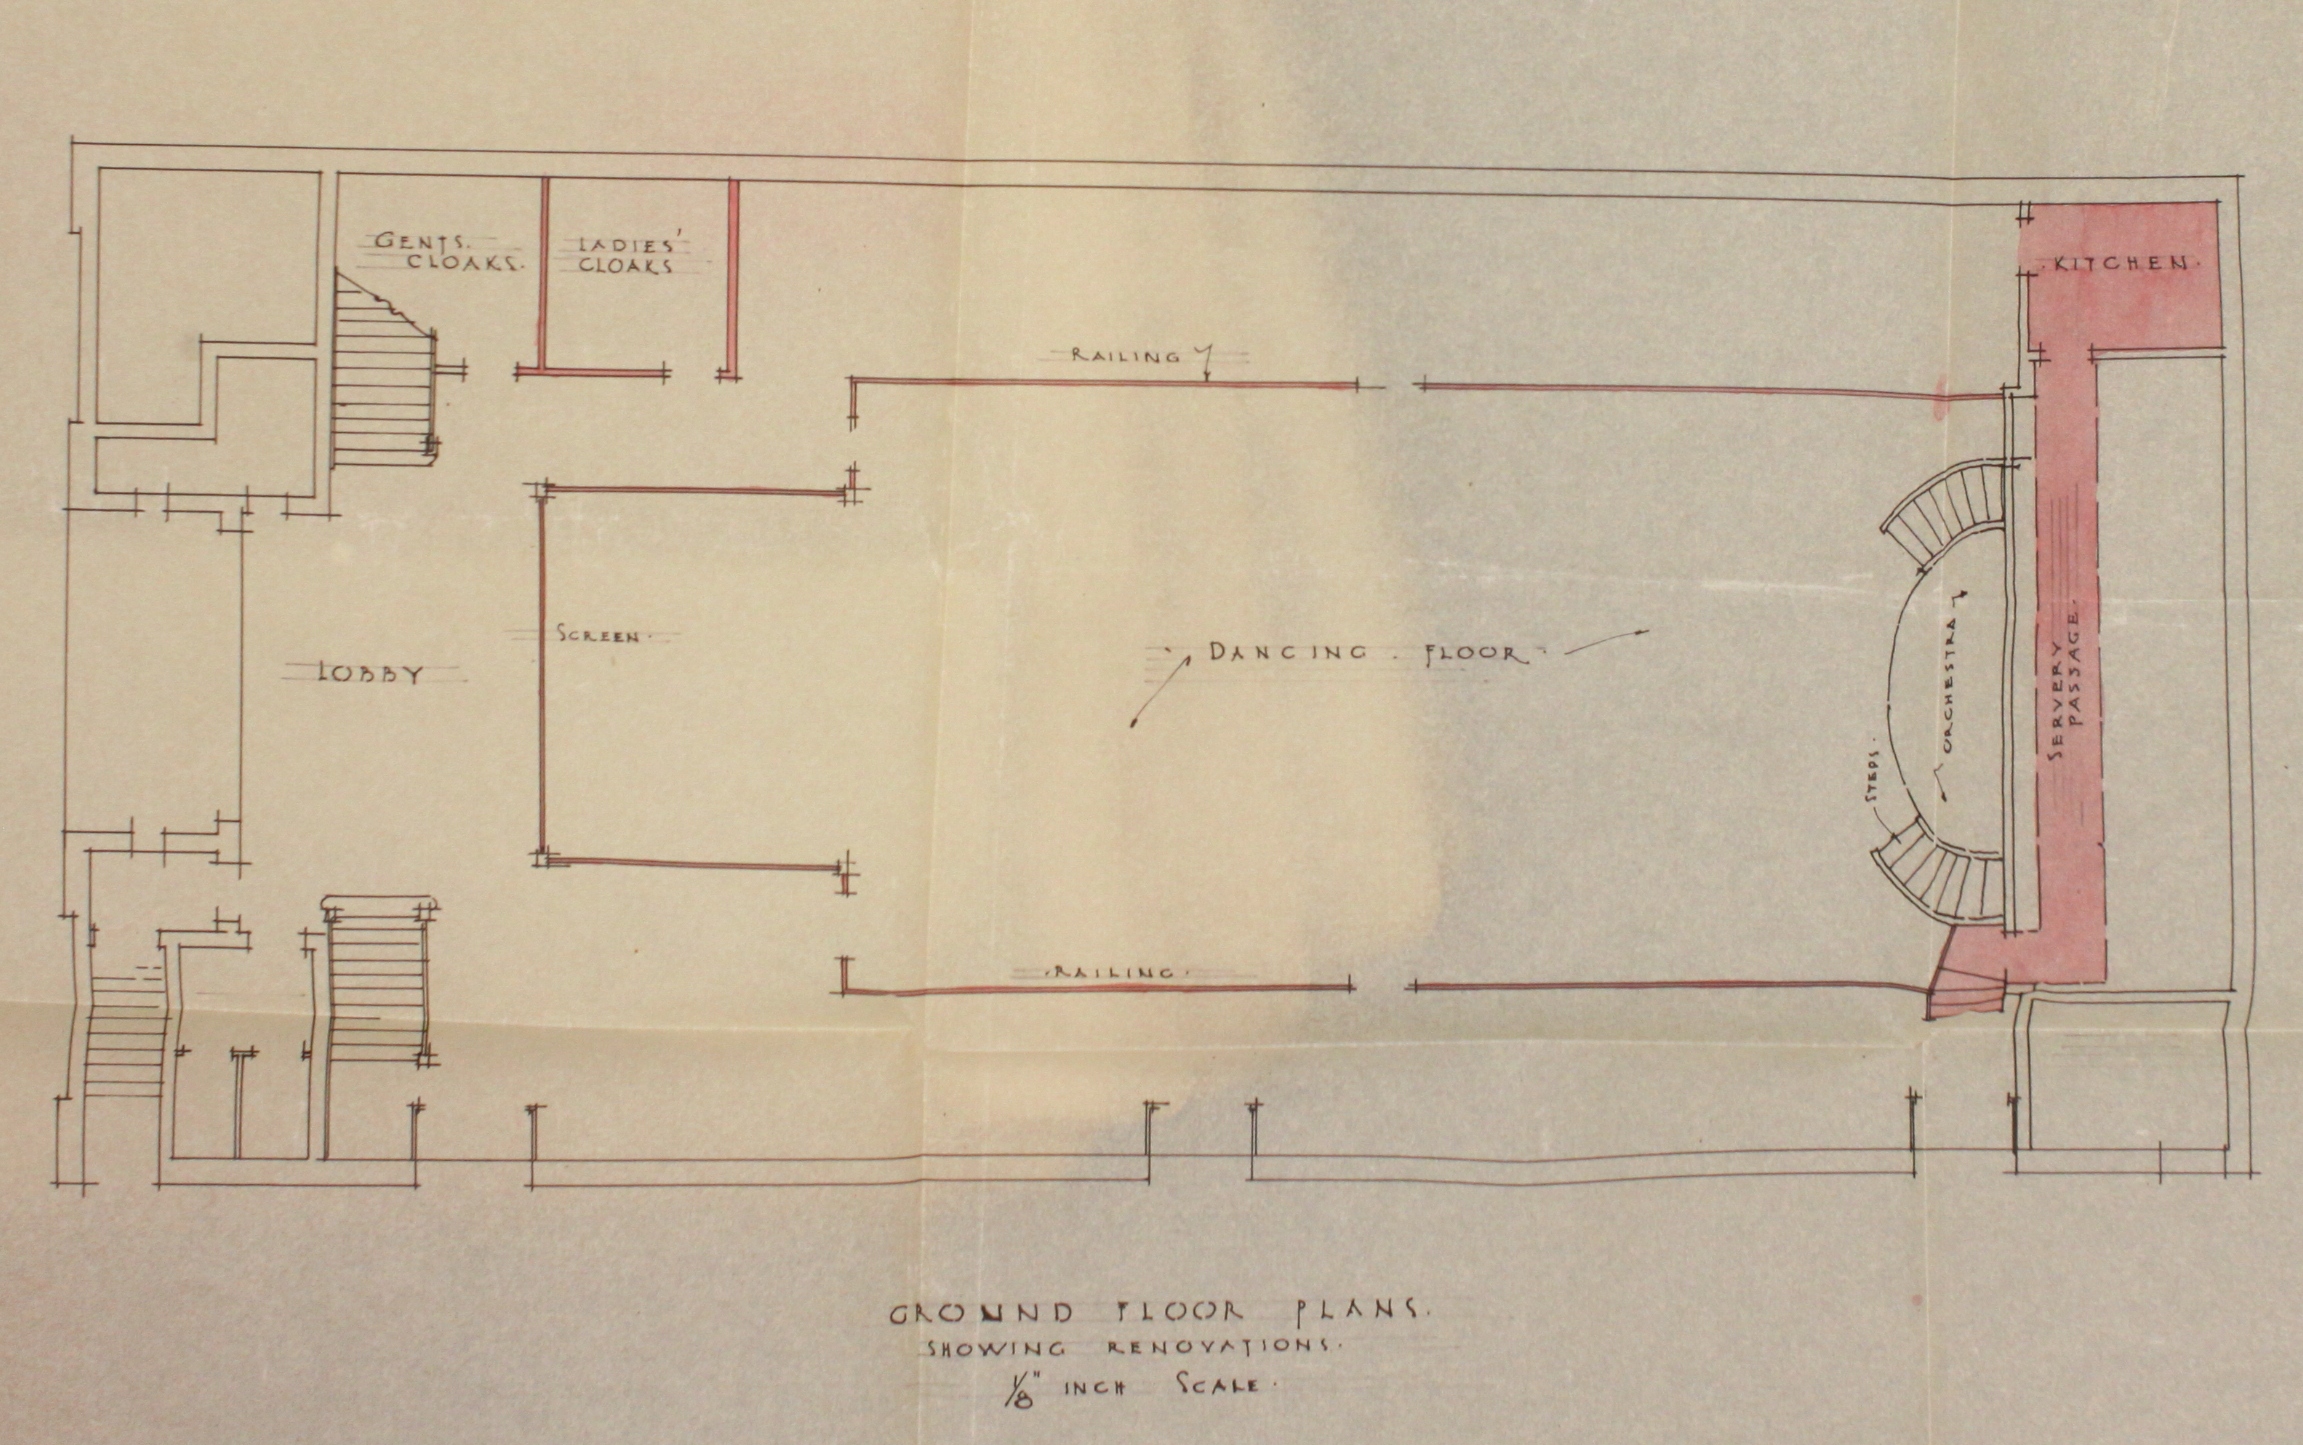 Image of a building plan